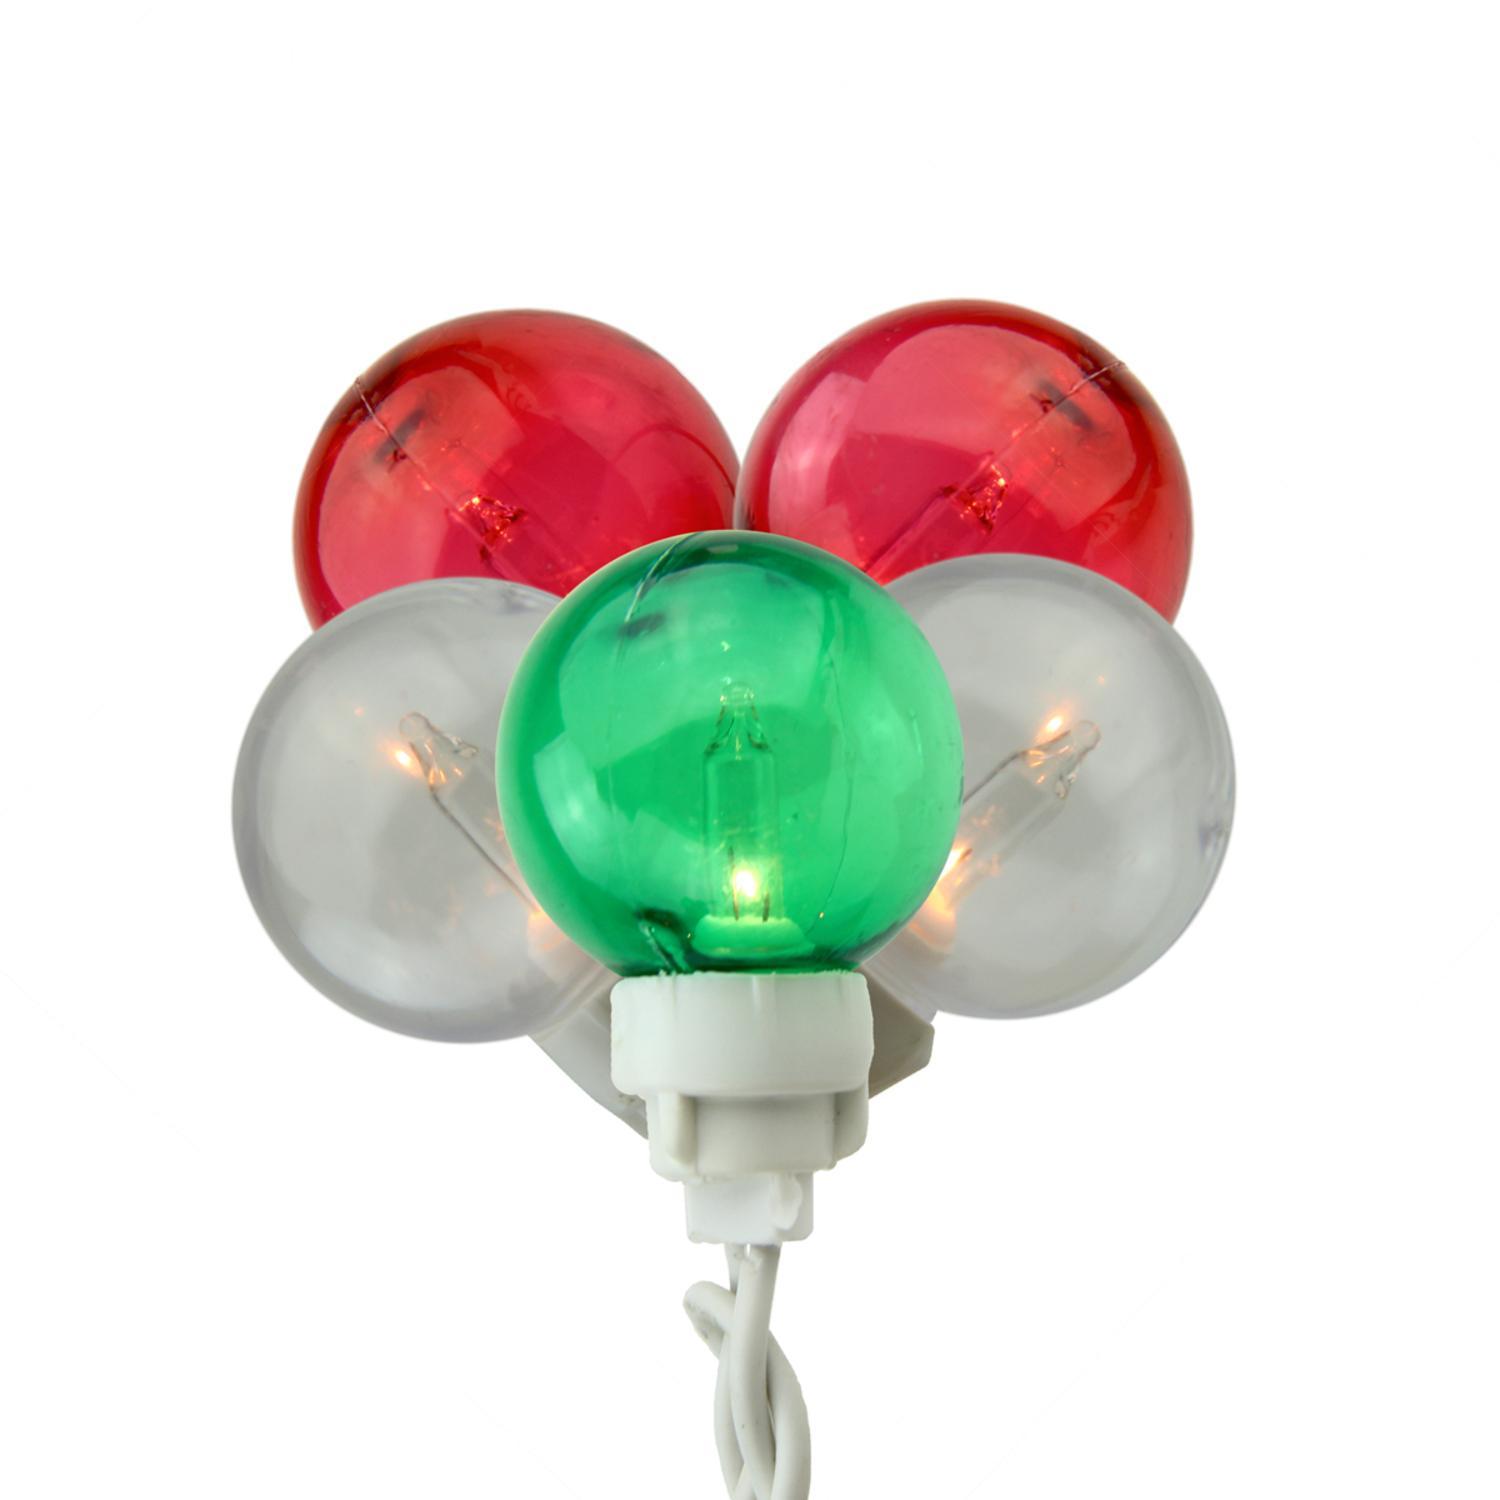 Red White Globe Logo - Set of 100 Green, Red and White G30 Globe Icicle Christmas Lights